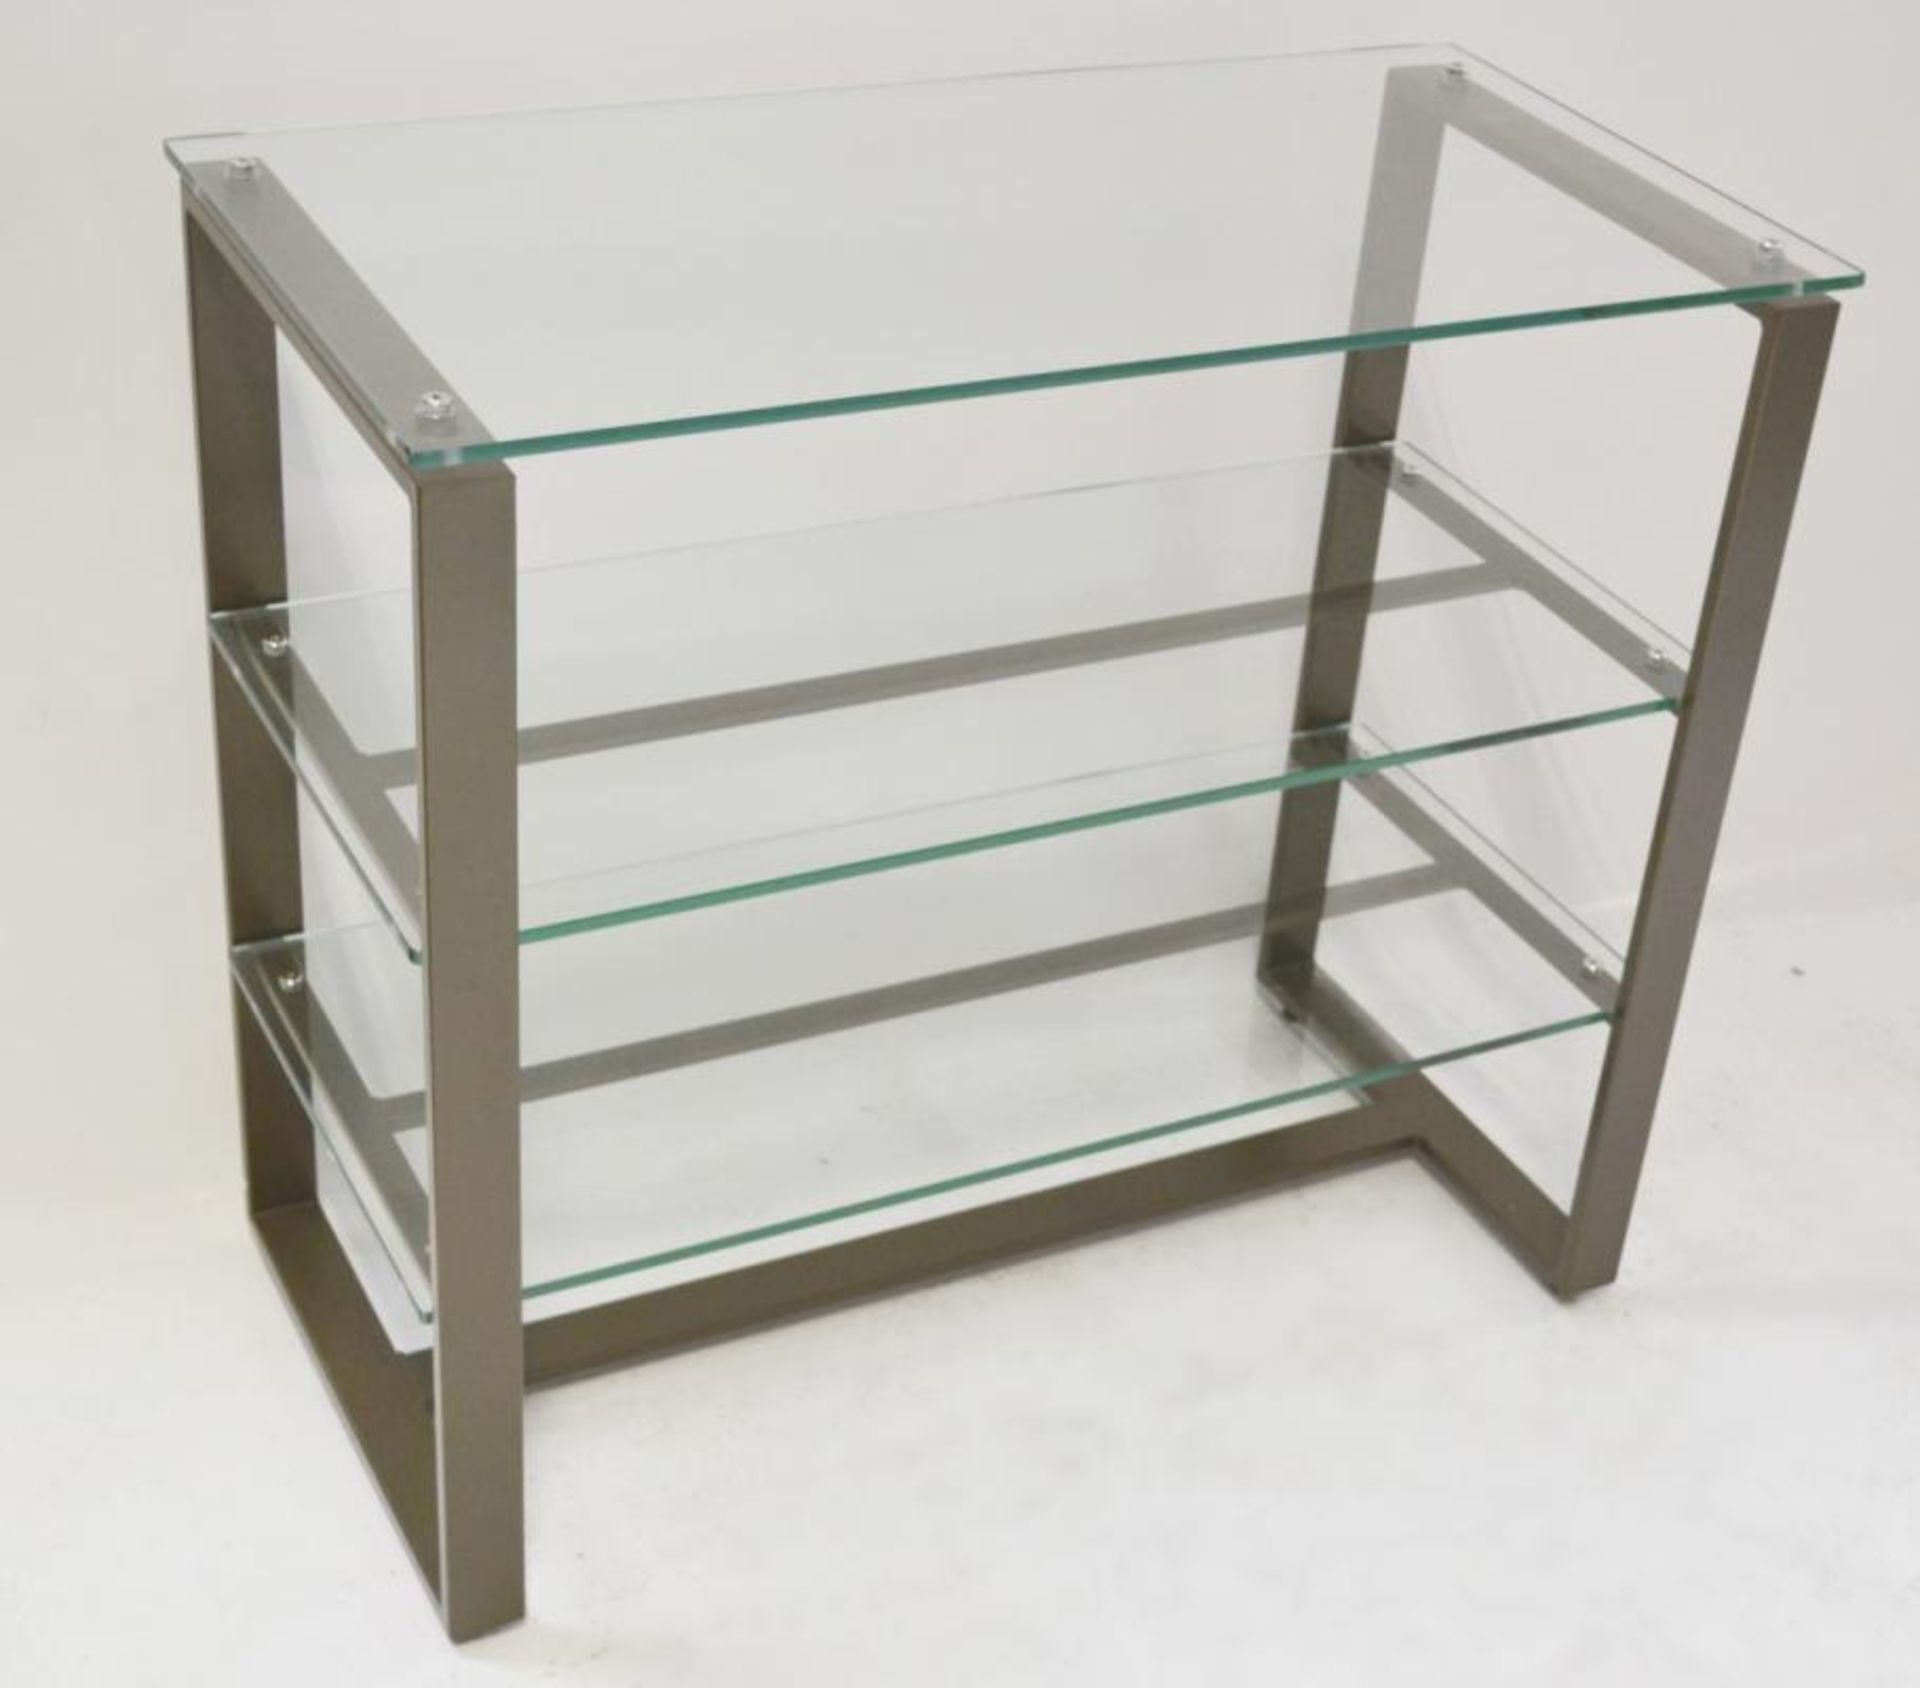 8 x Medium Contemporary Retail Glass Display Units With Sturdy Metal Frames and Three Shelves - - Image 2 of 9